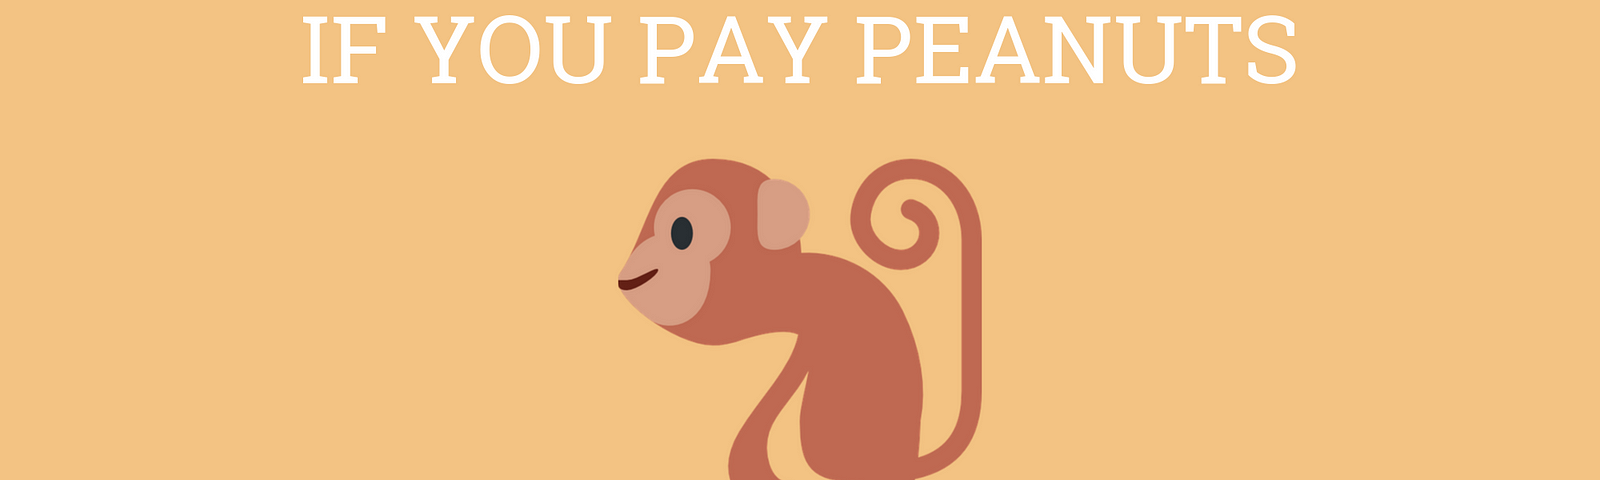 If you pay peanuts you will get monkeys